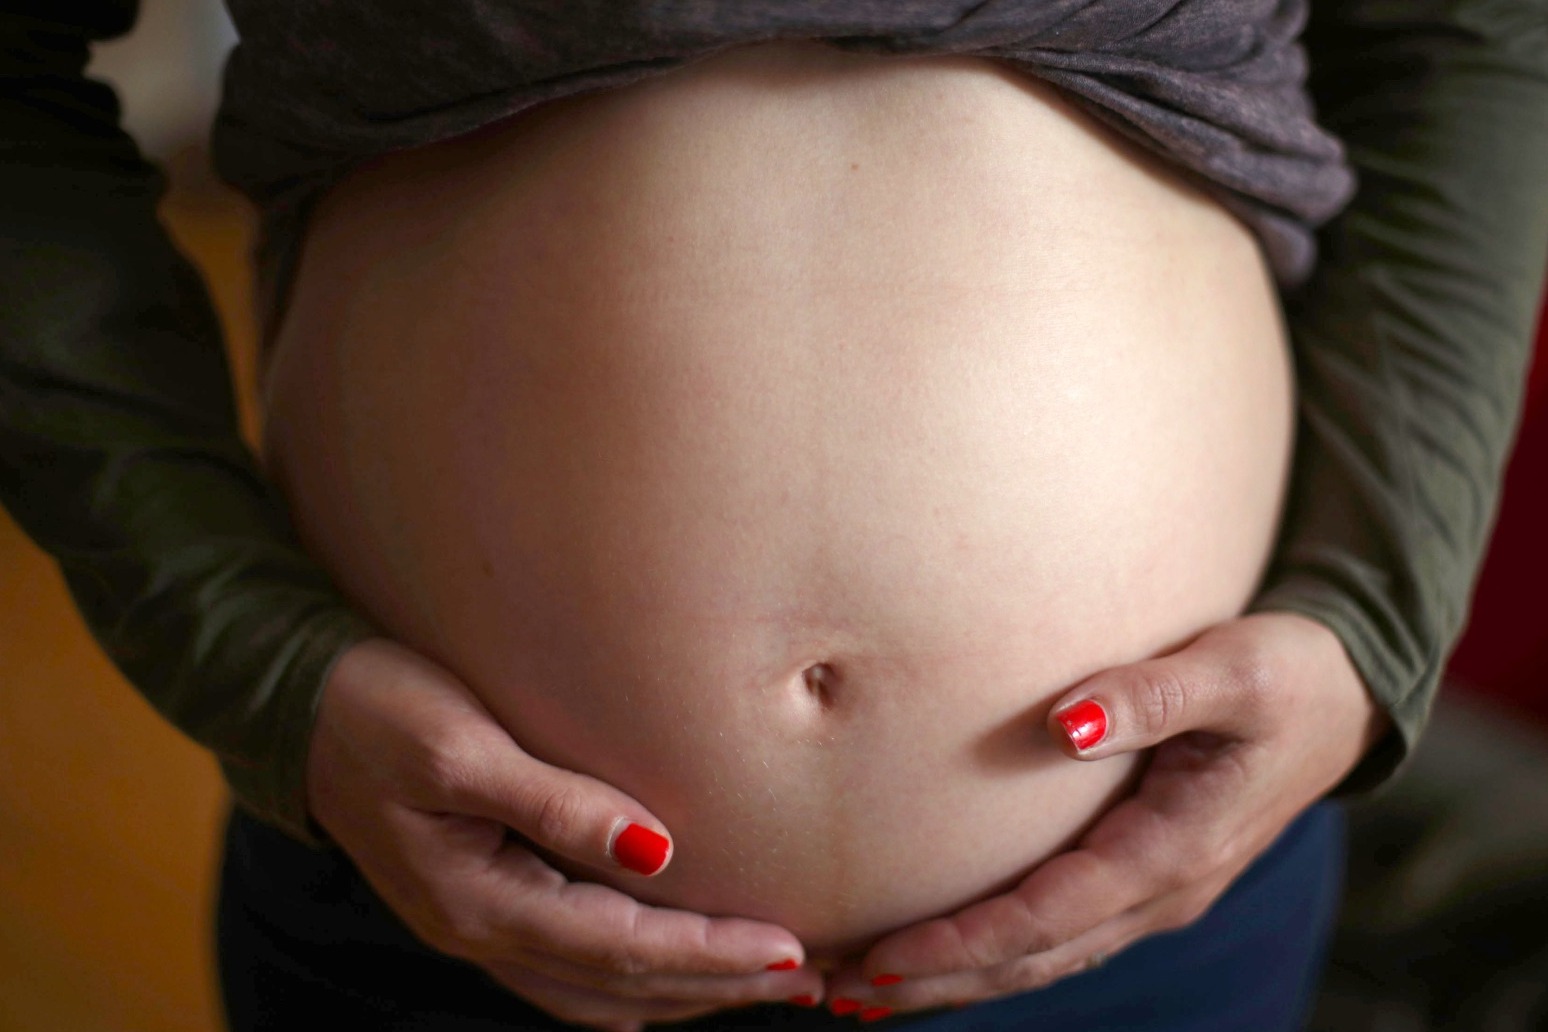 Anti anxiety drug may increase risk of birth defects if taken while pregnant